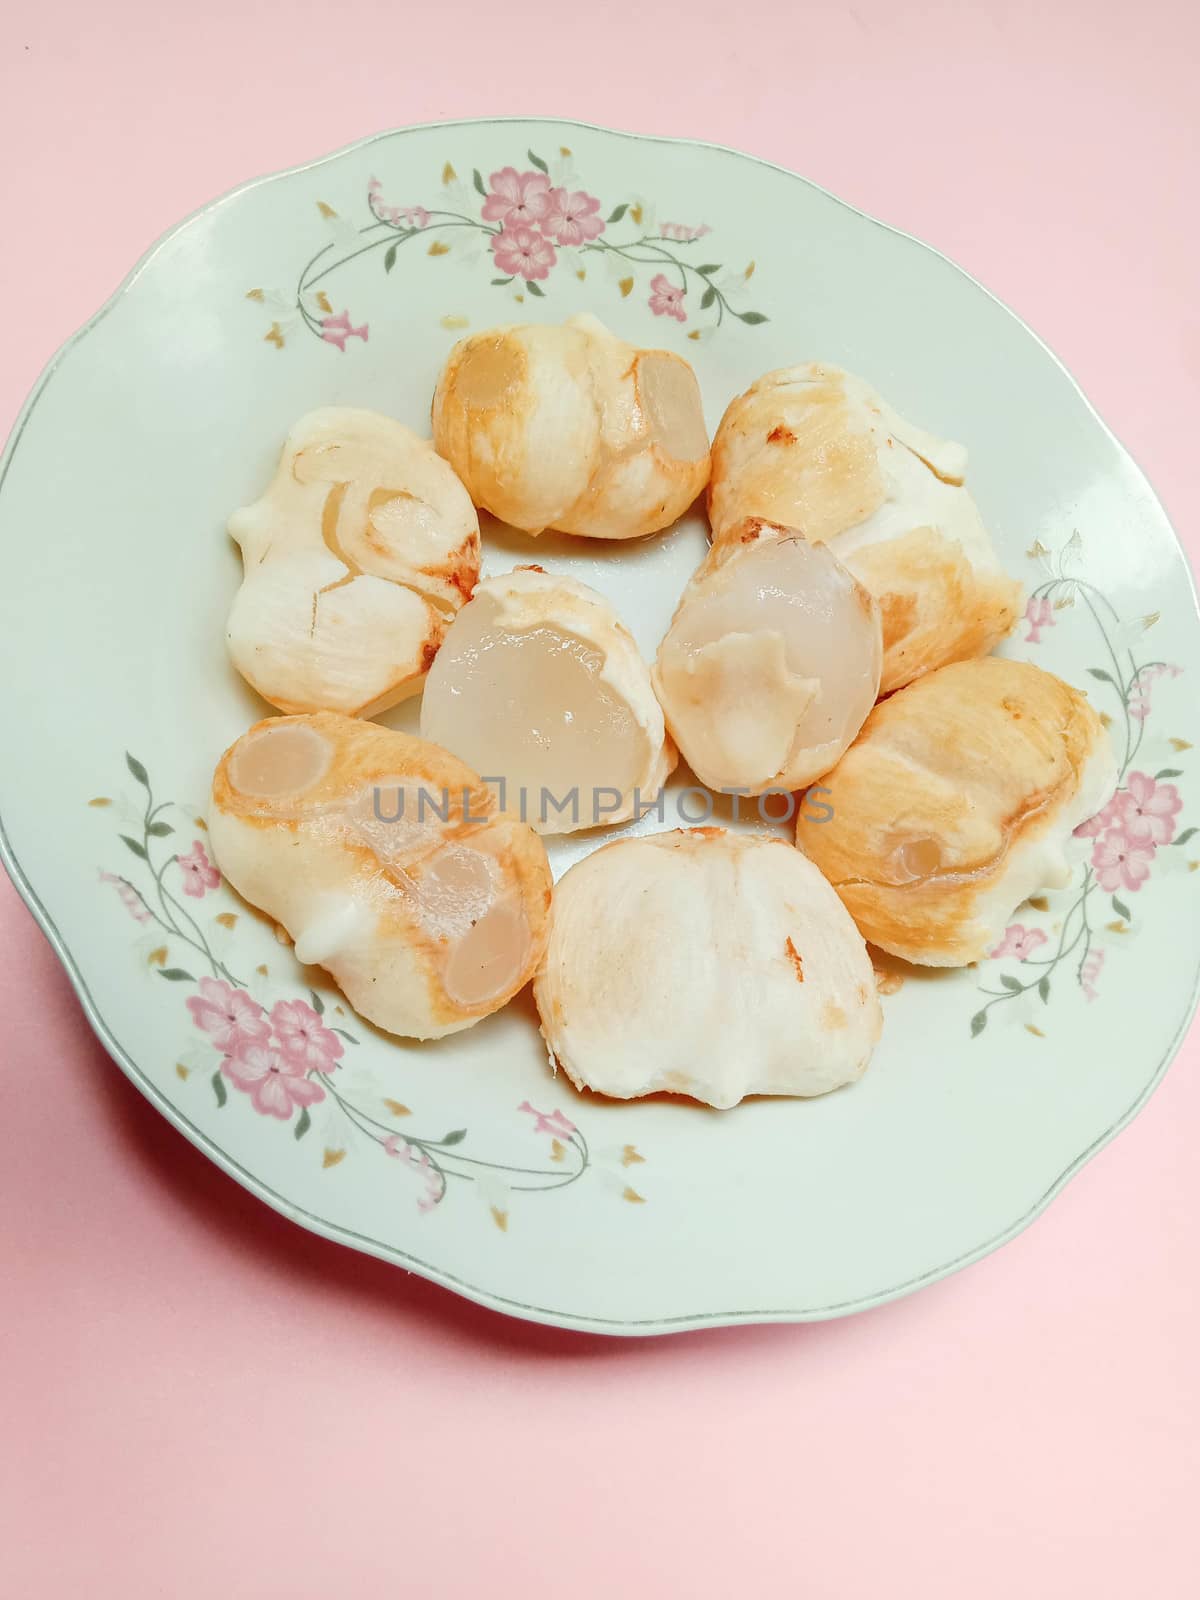 Tasty and Healthy Palmyra Palm Seeds Stock on Plate